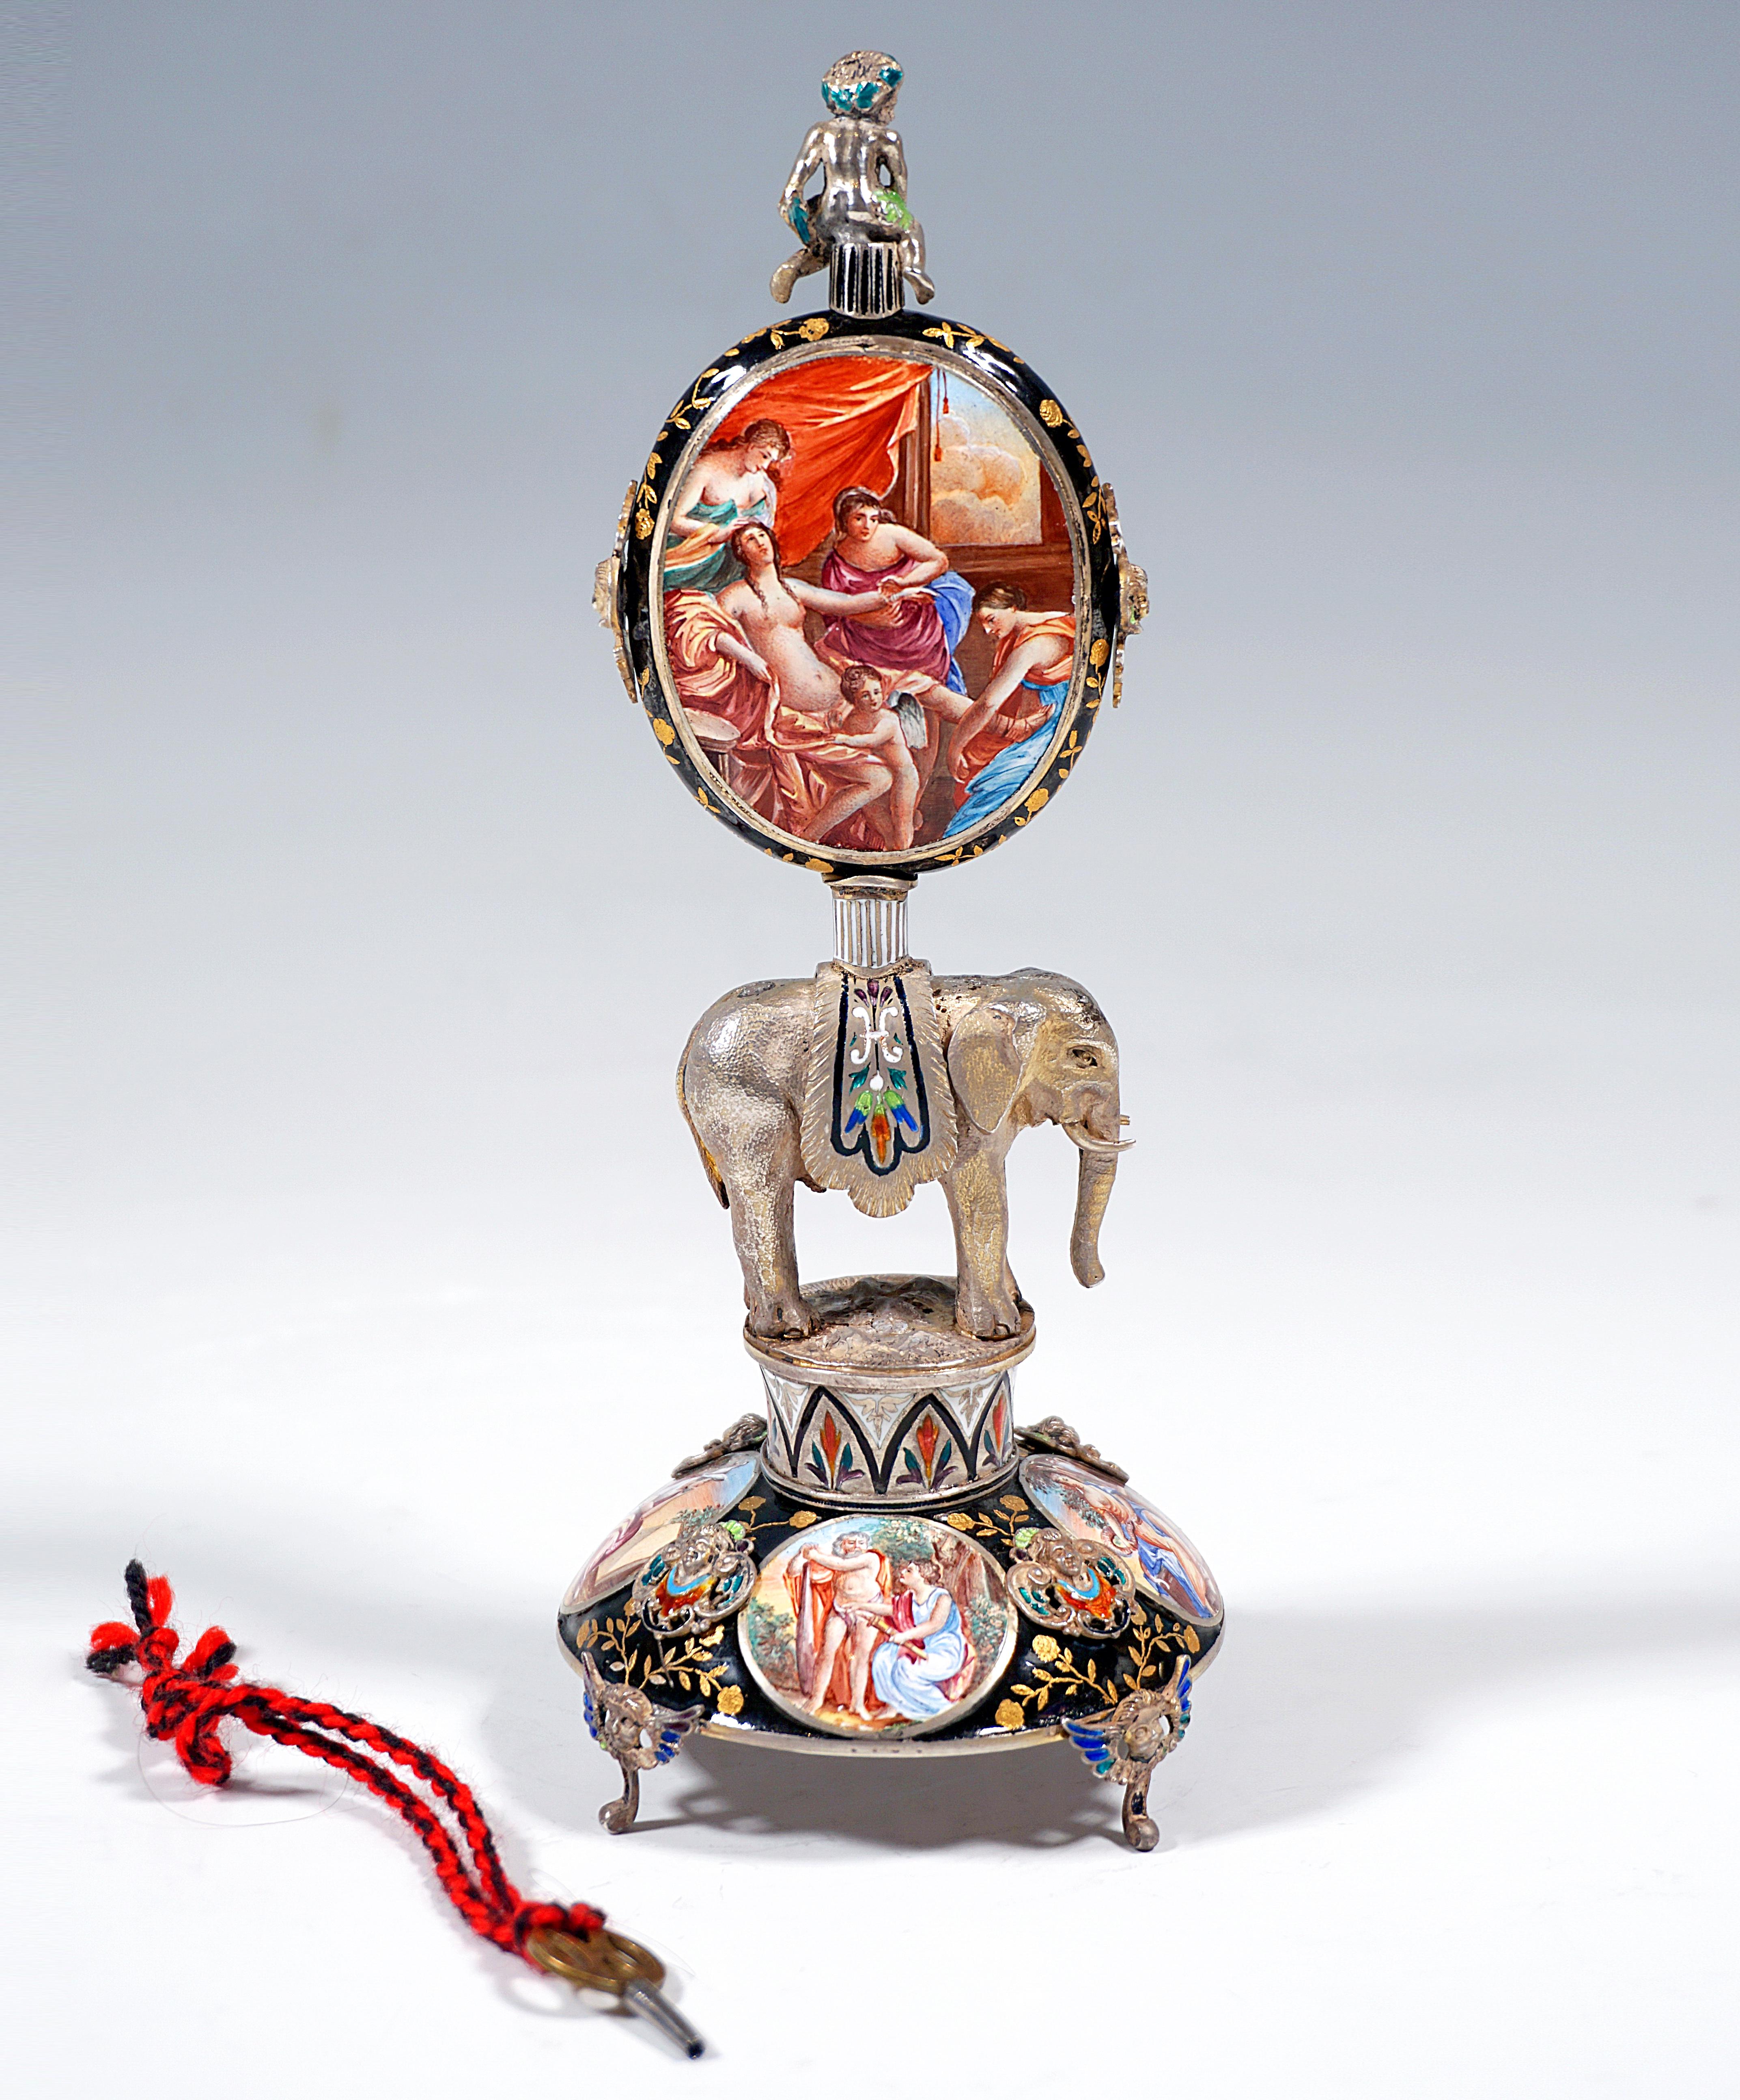 Other Viennese Silver Enamel Table Clock with Elephant Carrying the Case, ca. 1880